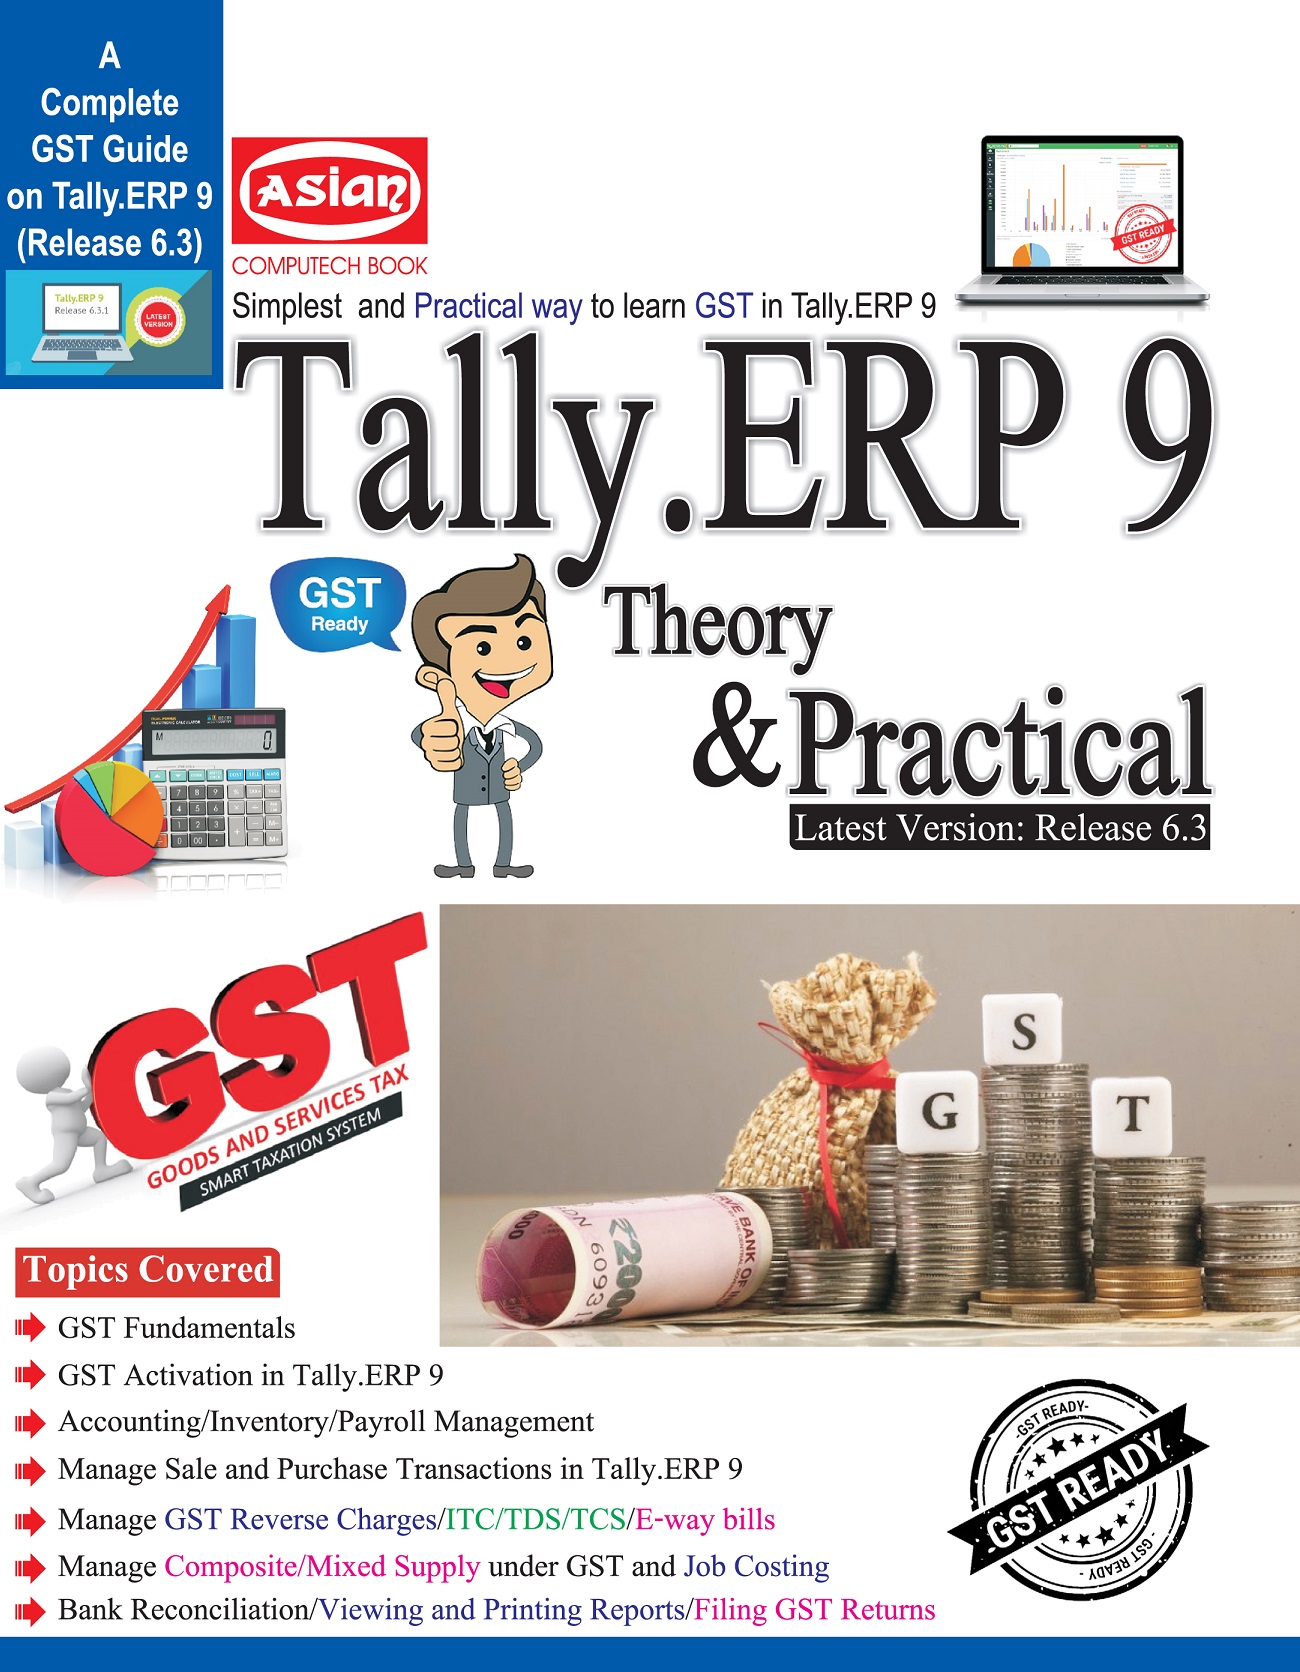 practical assignment on gst in tally erp 9